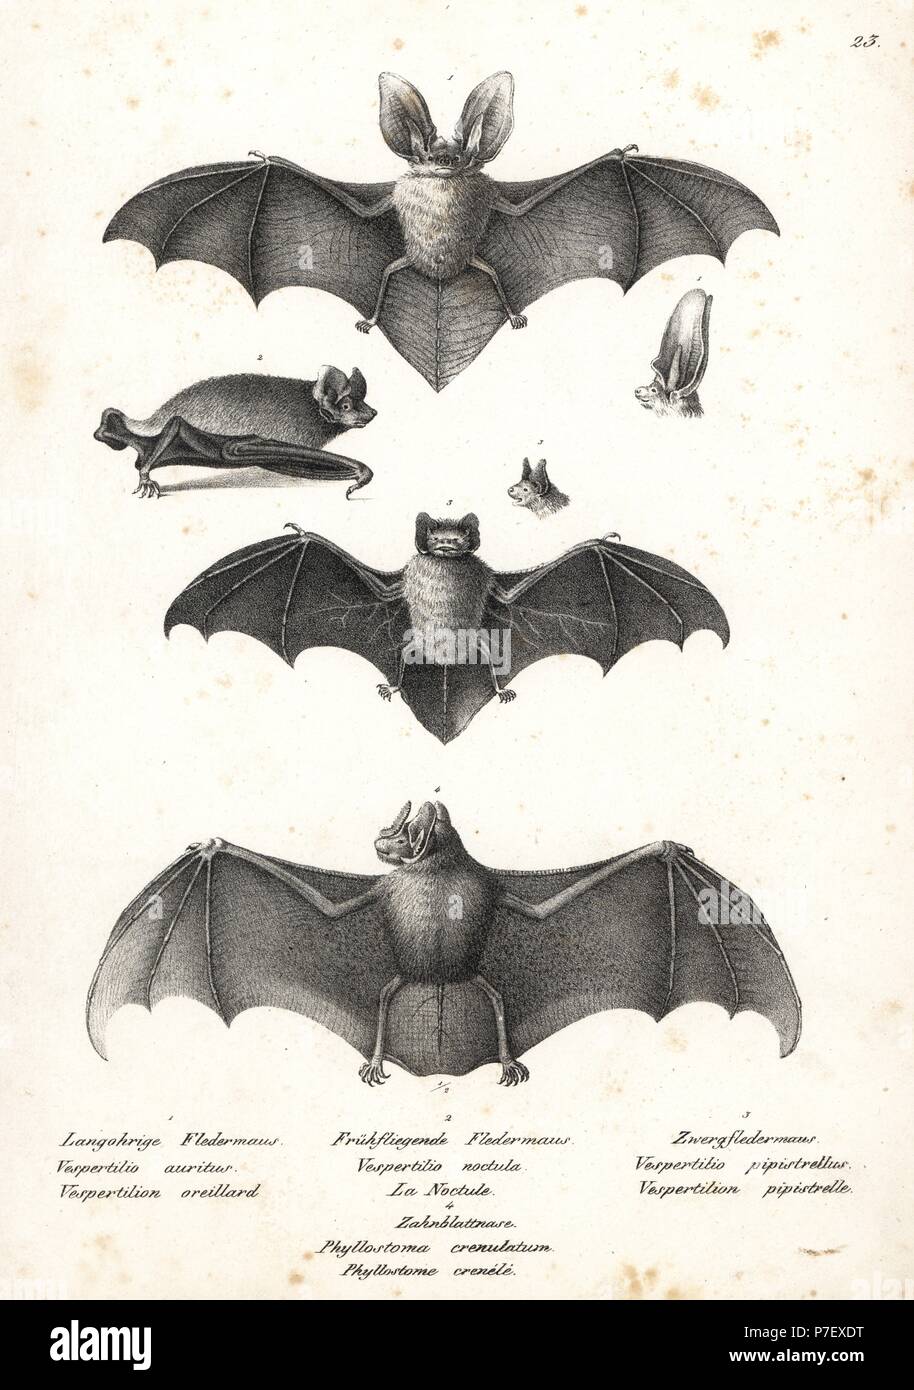 Brown long-eared bat, Plecotus auritus 1, common noctule, Nyctalus noctula 2, common pipistrelle, Pipistrellus pipistrellus 3, and striped hairy-nosed bat, Mimon crenulatum 4. Lithograph by Karl Joseph Brodtmann from Heinrich Rudolf Schinz's Illustrated Natural History of Men and Animals, 1836. Stock Photo